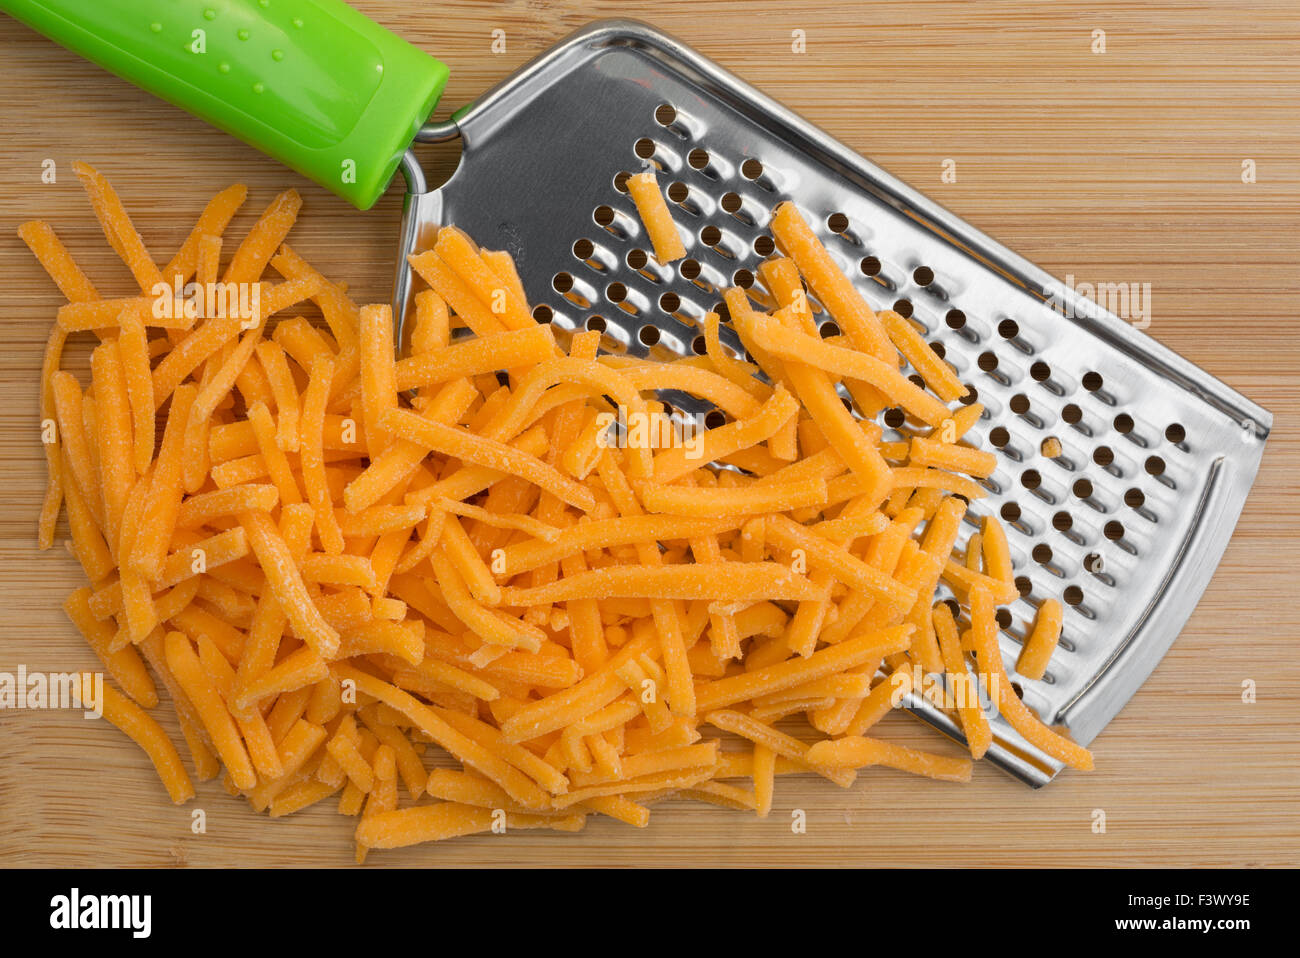 Close view of cheese that has been grated with a cheese grater atop a wood cutting board. Stock Photo